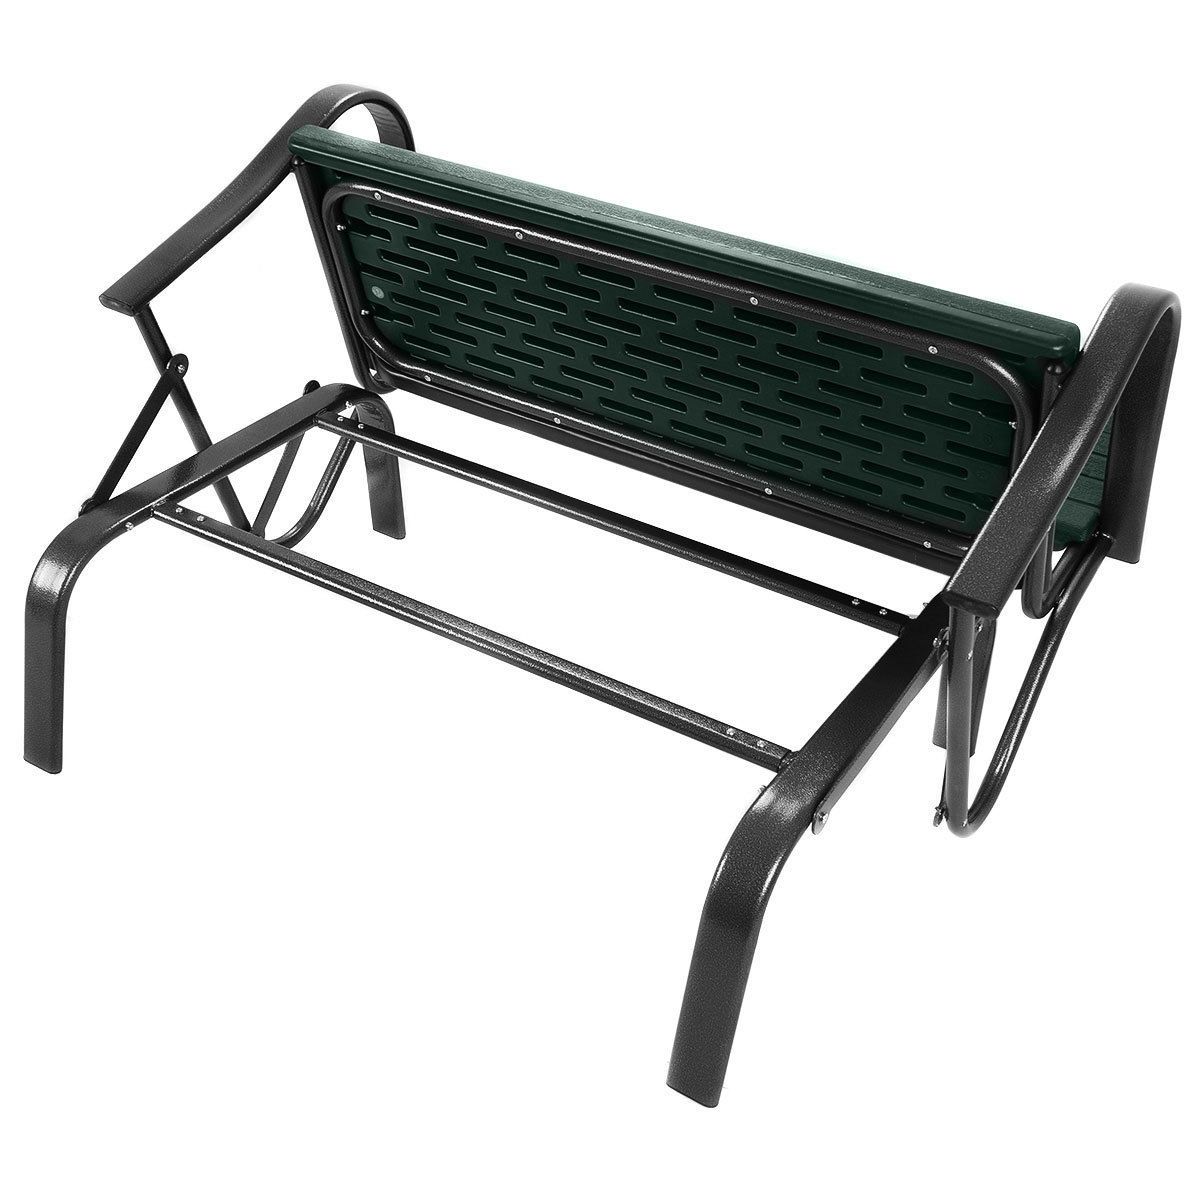 Outdoor Patio Swing Porch Rocker Glider Bench Loveseat Pertaining To Most Up To Date Outdoor Patio Swing Porch Rocker Glider Benches Loveseat Garden Seat Steel (View 16 of 30)